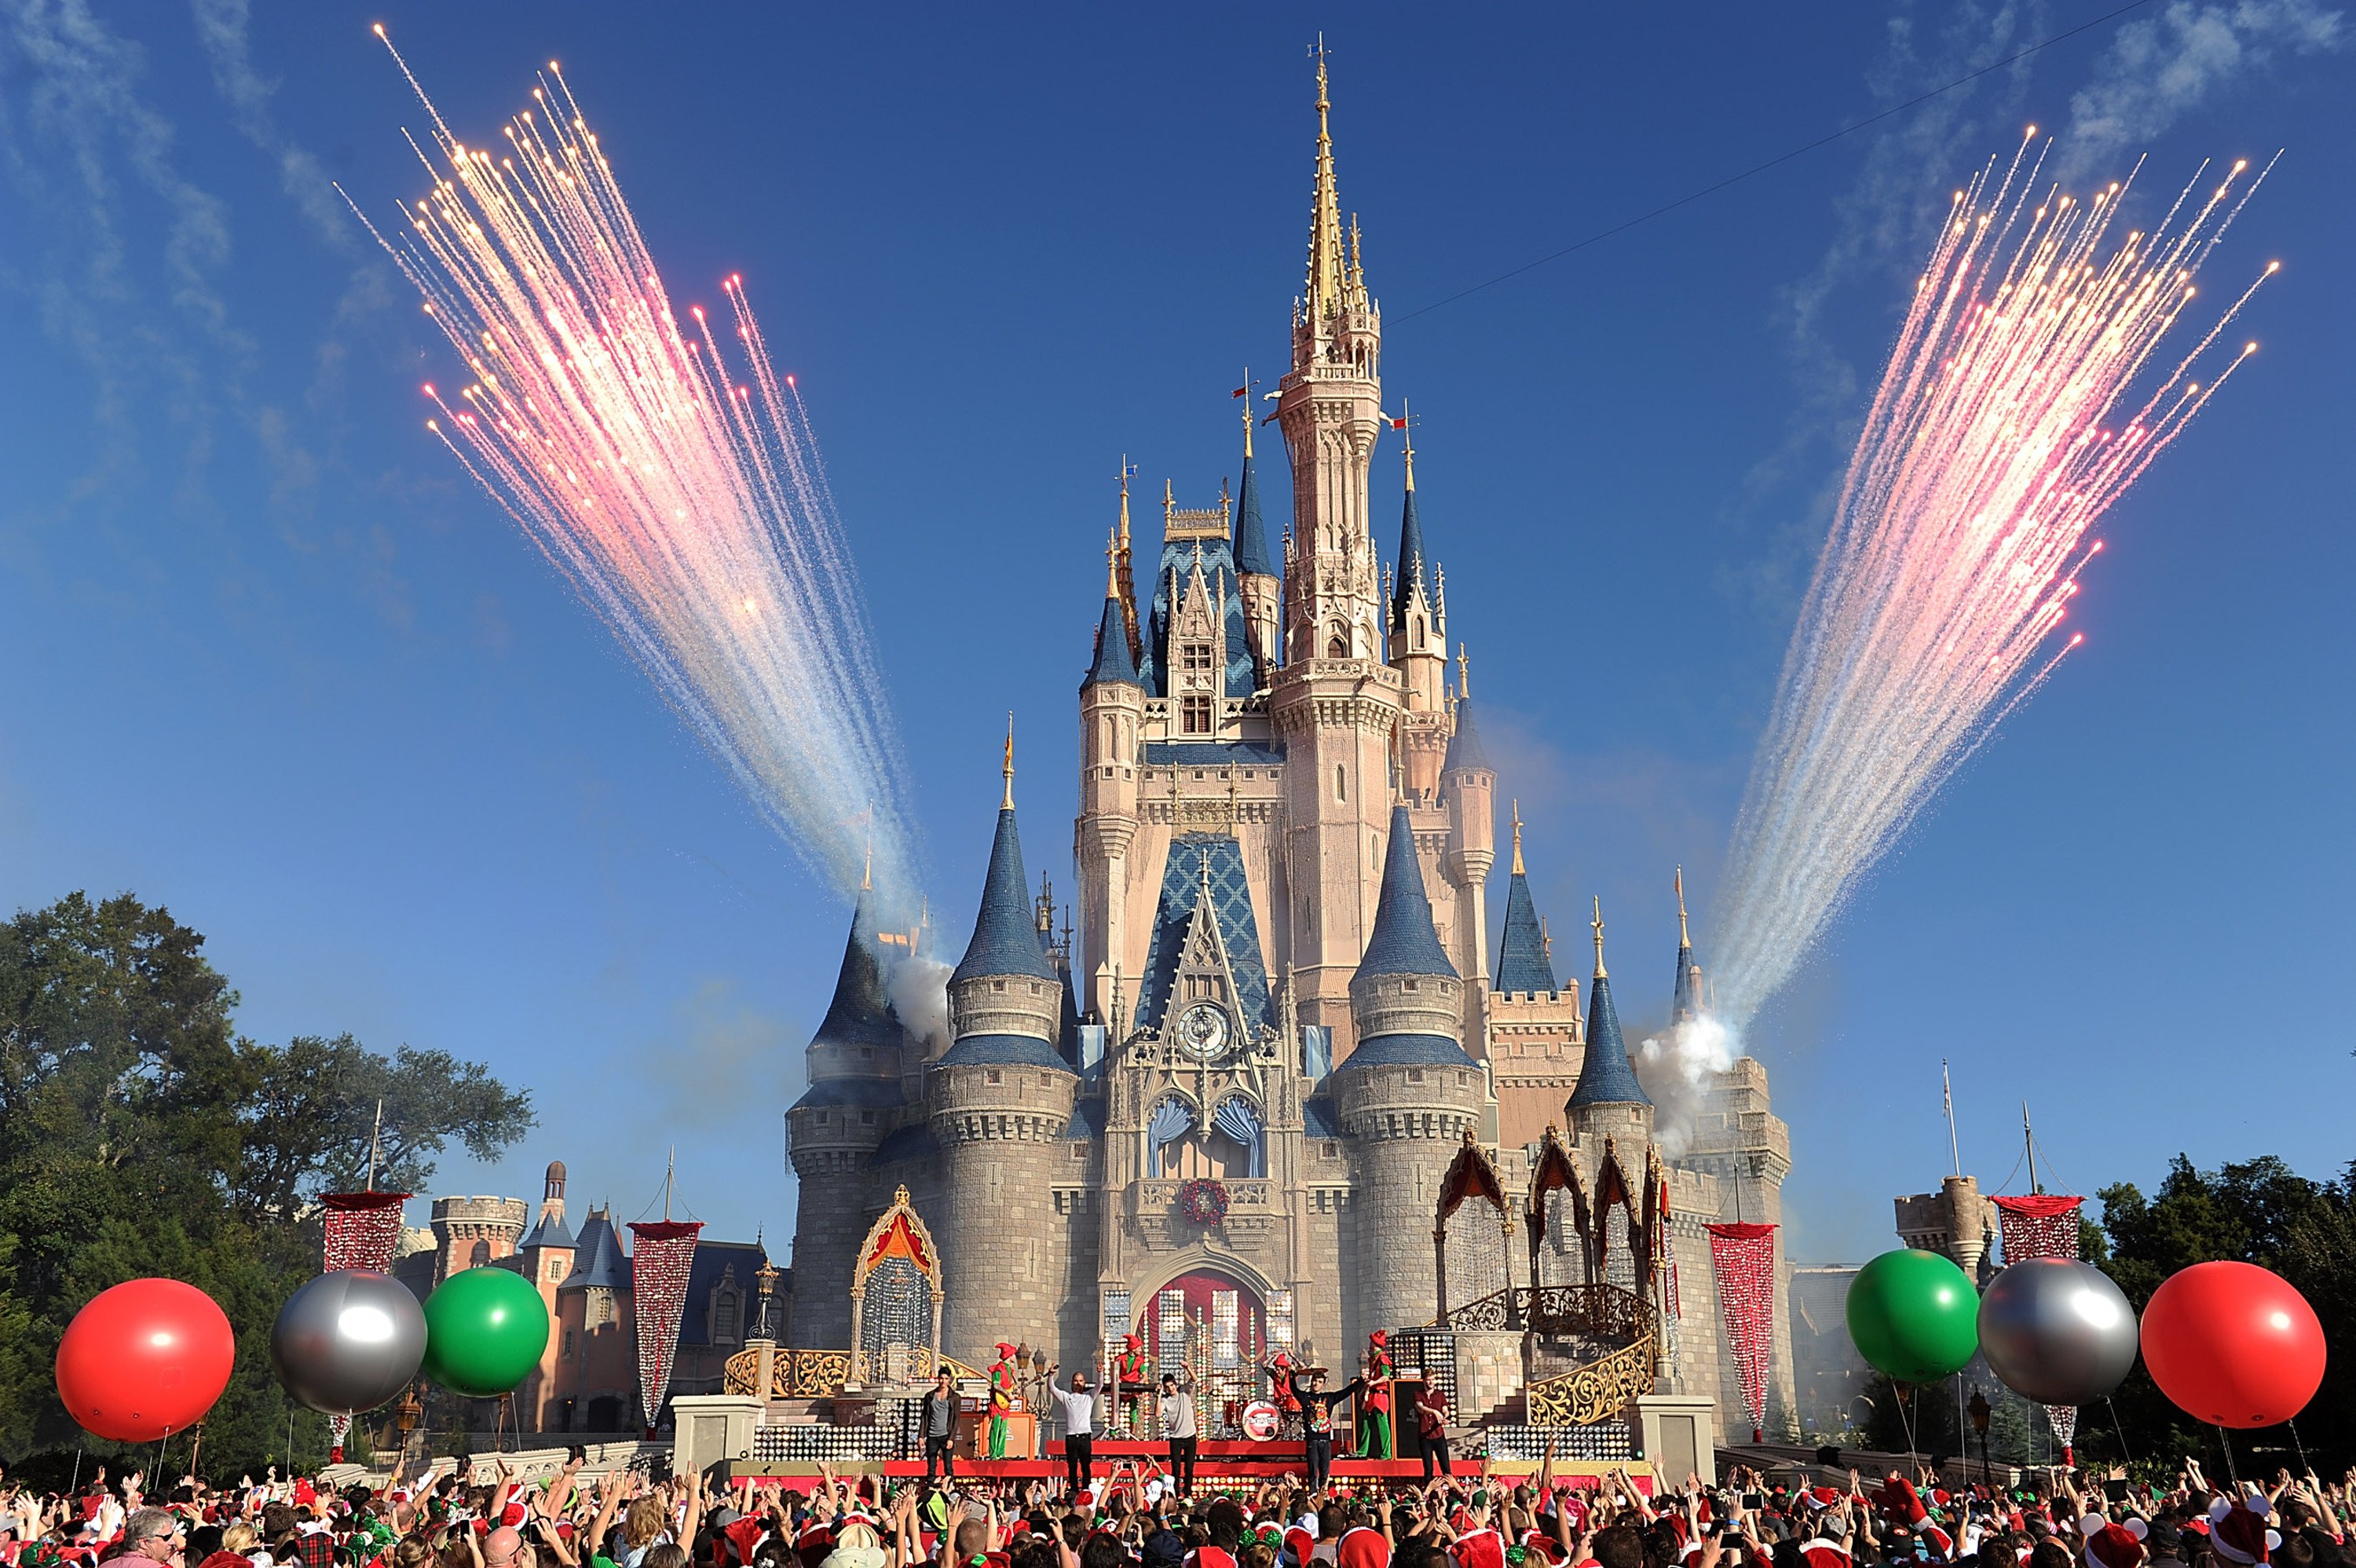 A Disney castle with fireworks